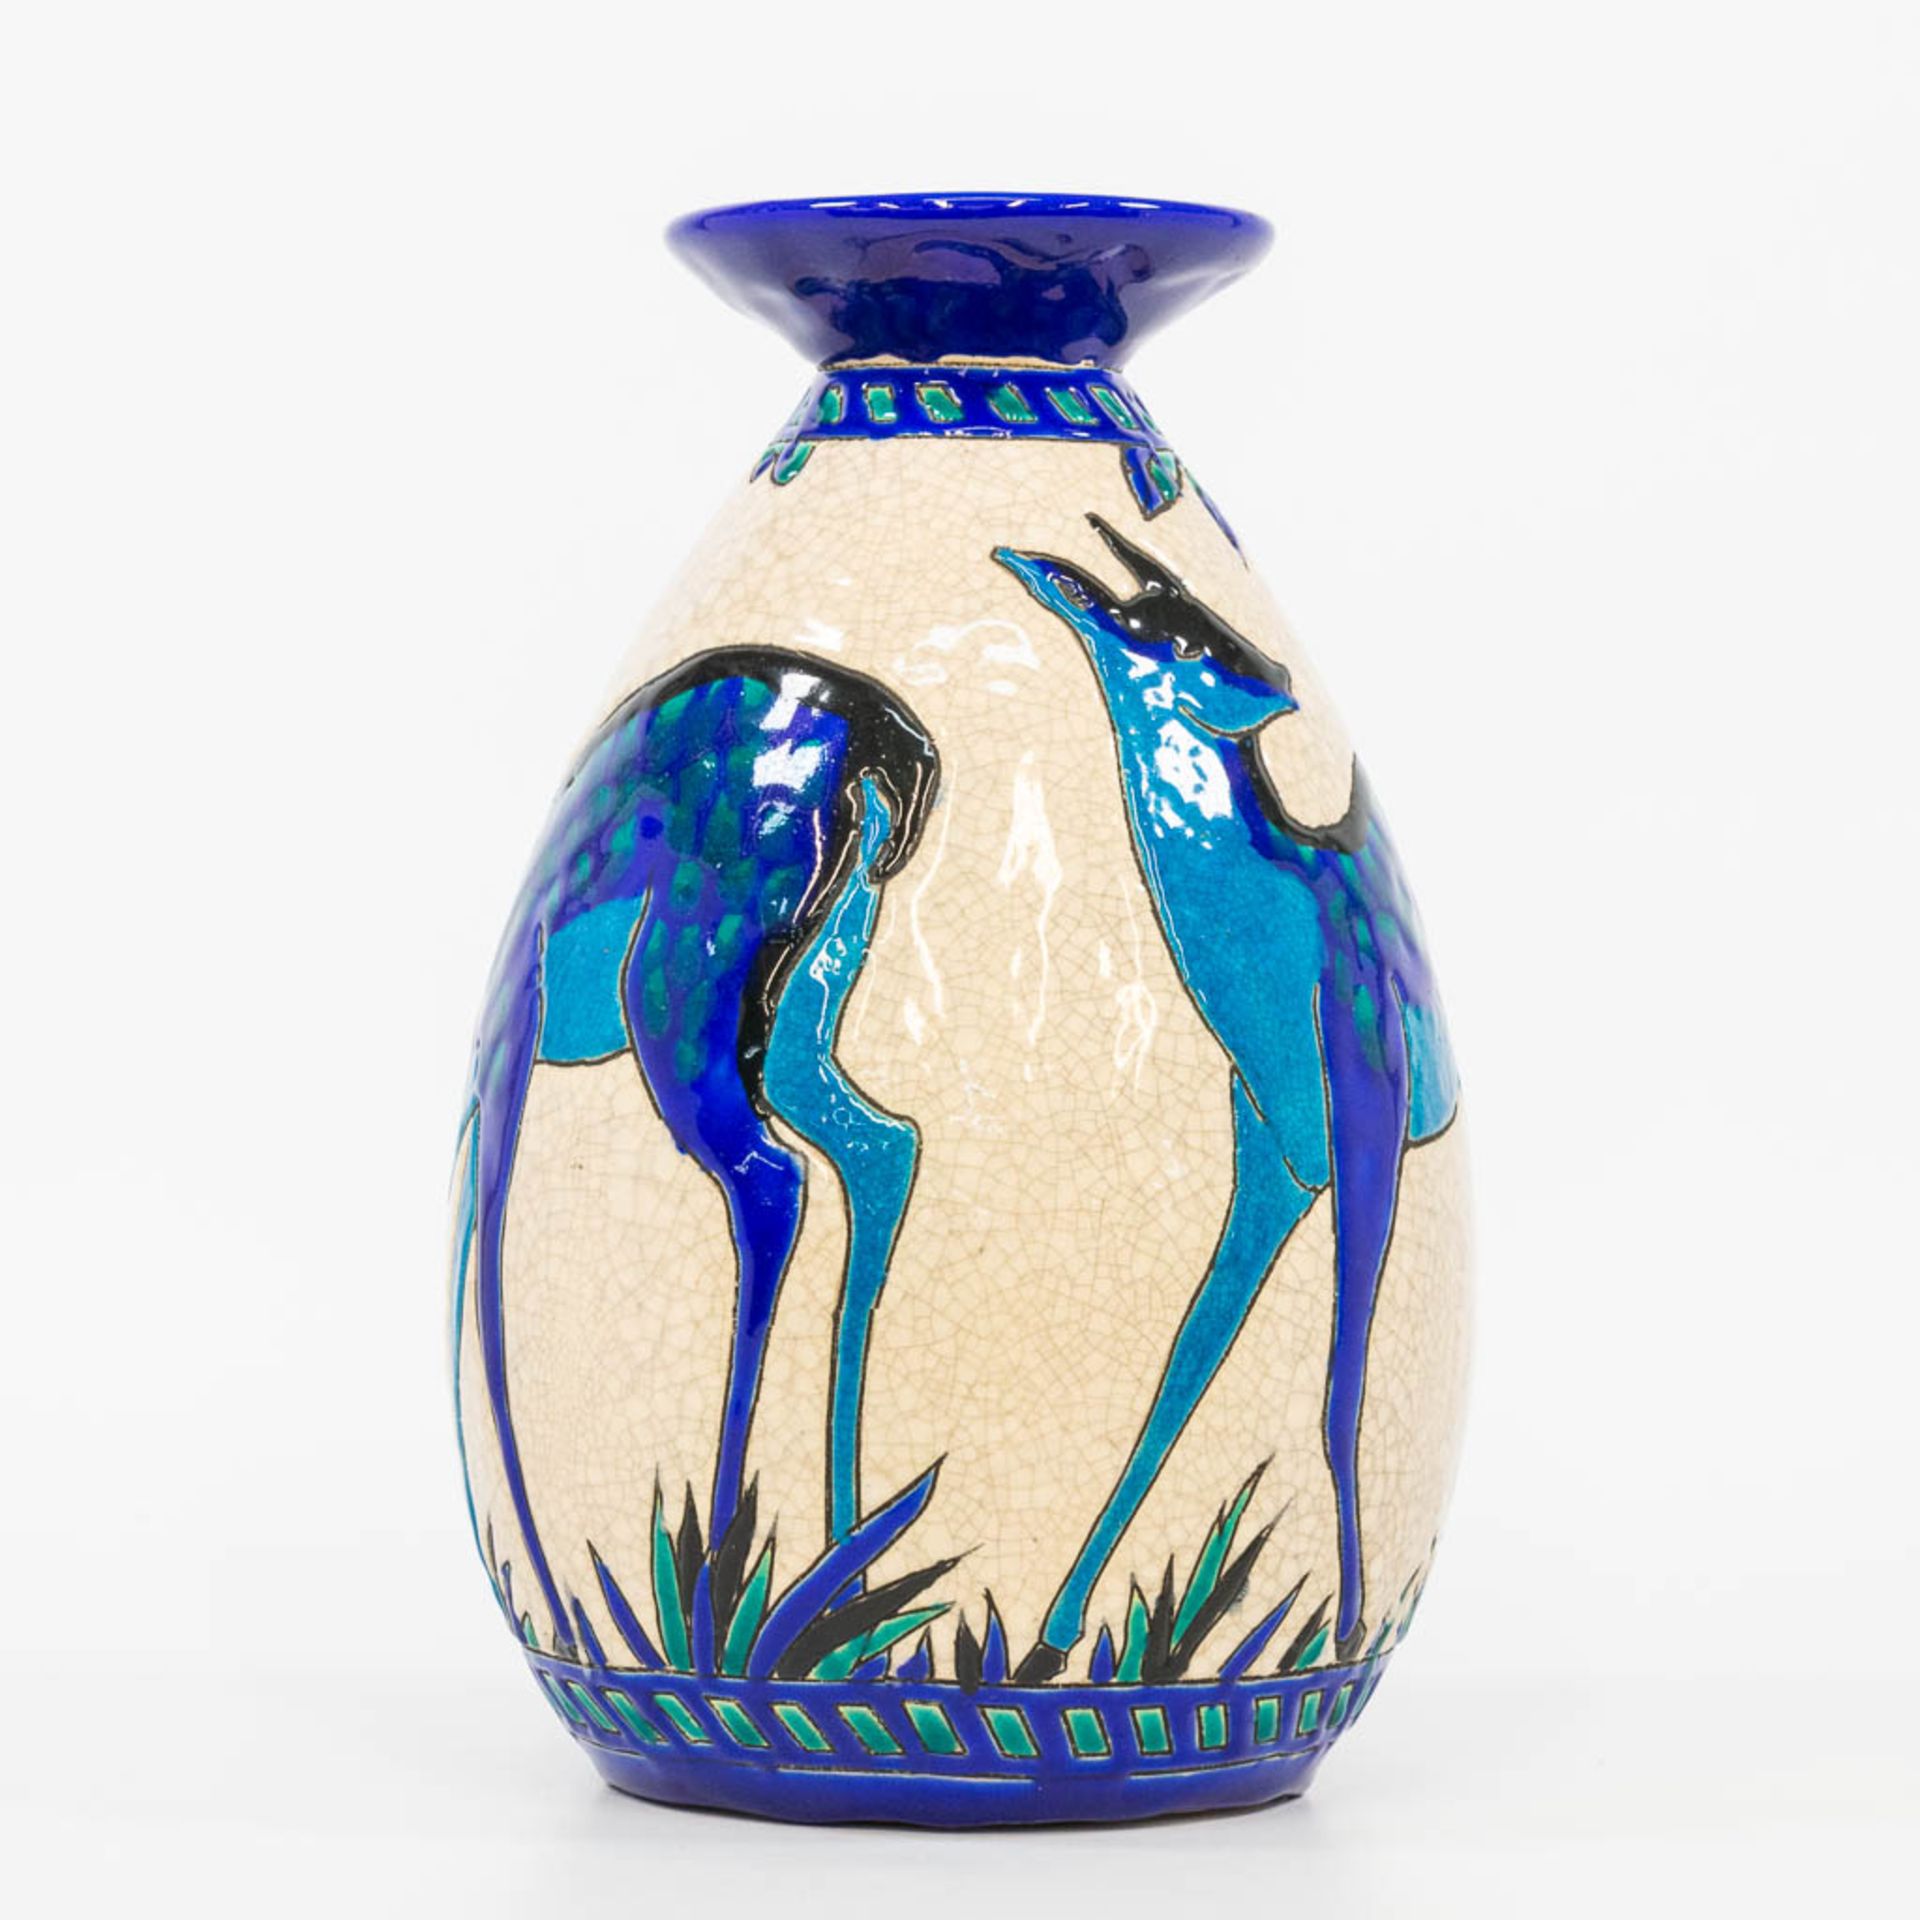 Charles CATTEAU (1880-1966) a glazed ceramic vase with decor 943 and made by Boch. (26,5 x 17 cm) - Bild 5 aus 13